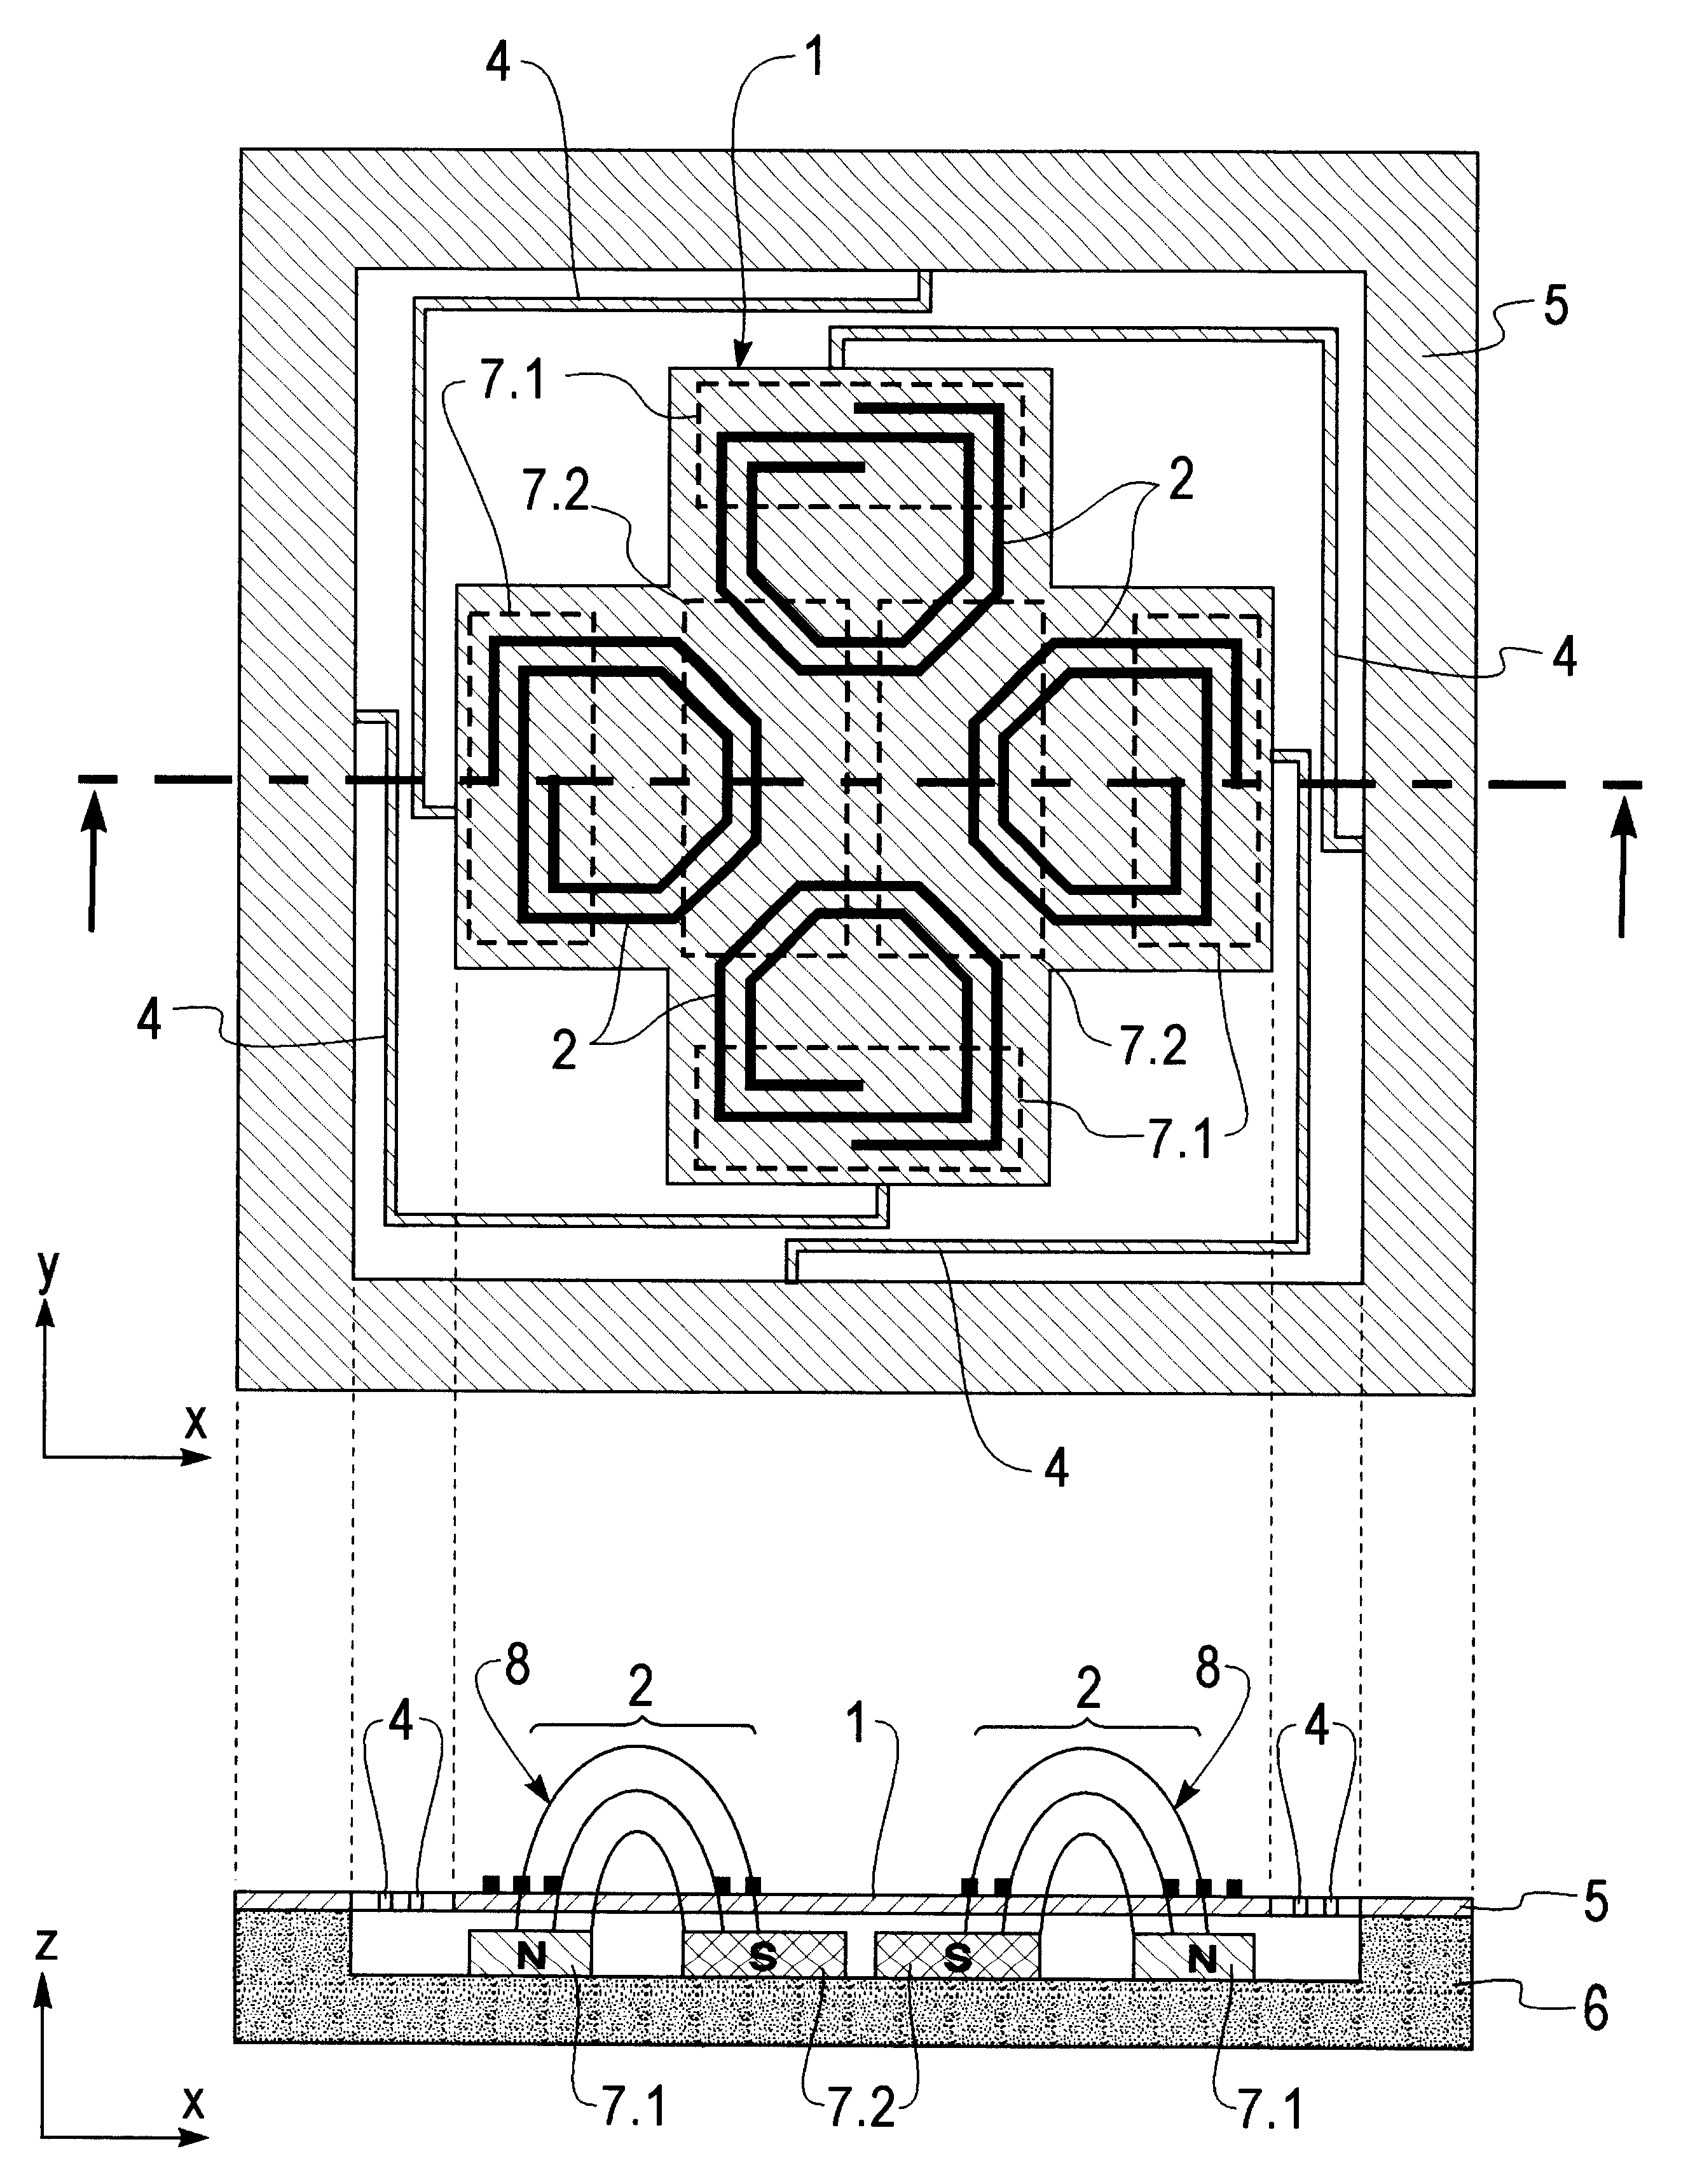 Magnetic scanning or positioning system with at least two degrees of freedom